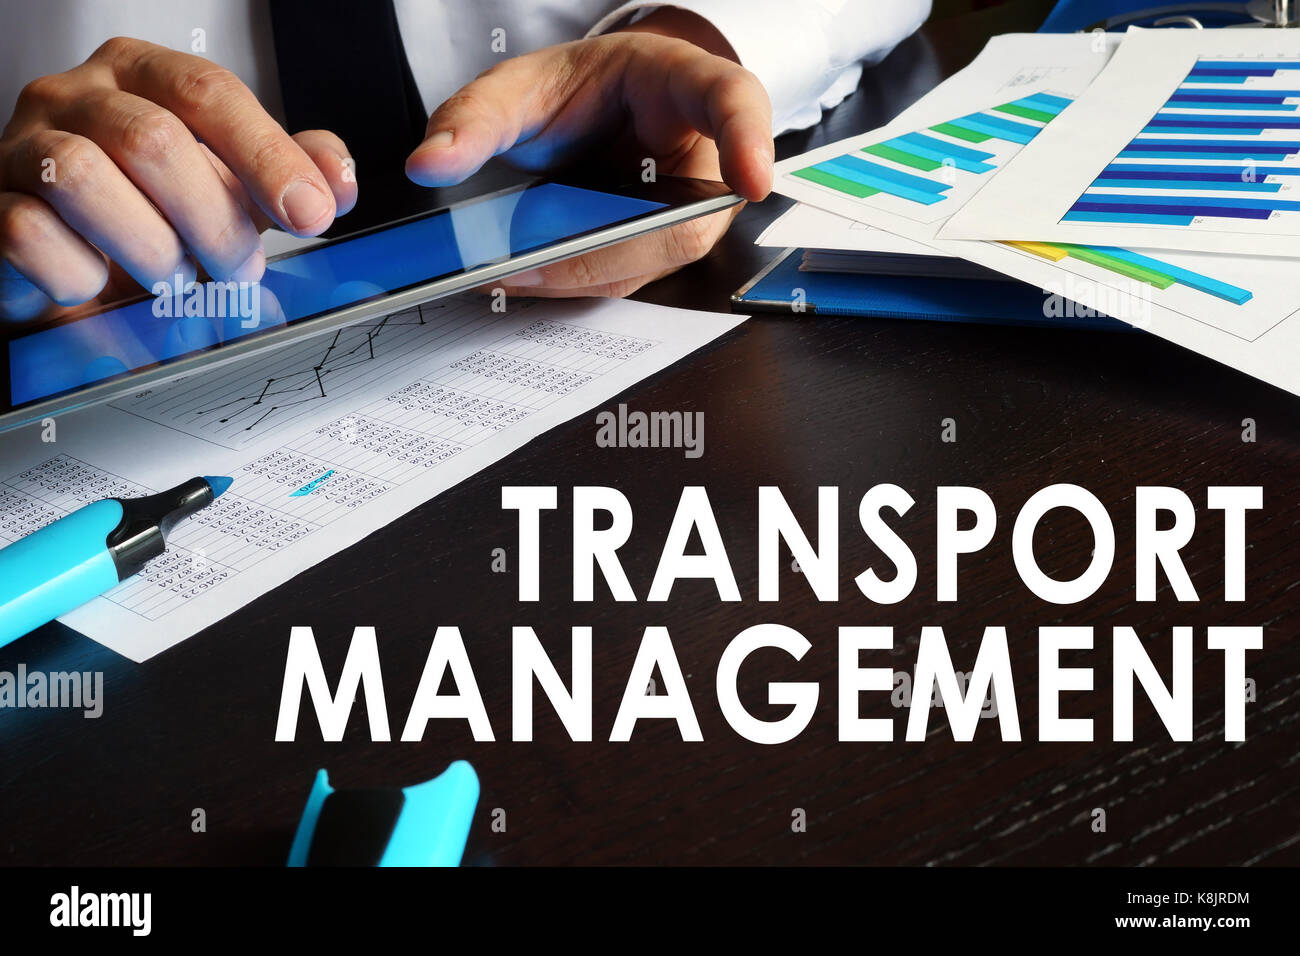 Transport management concept. Man is holding tablet. Stock Photo